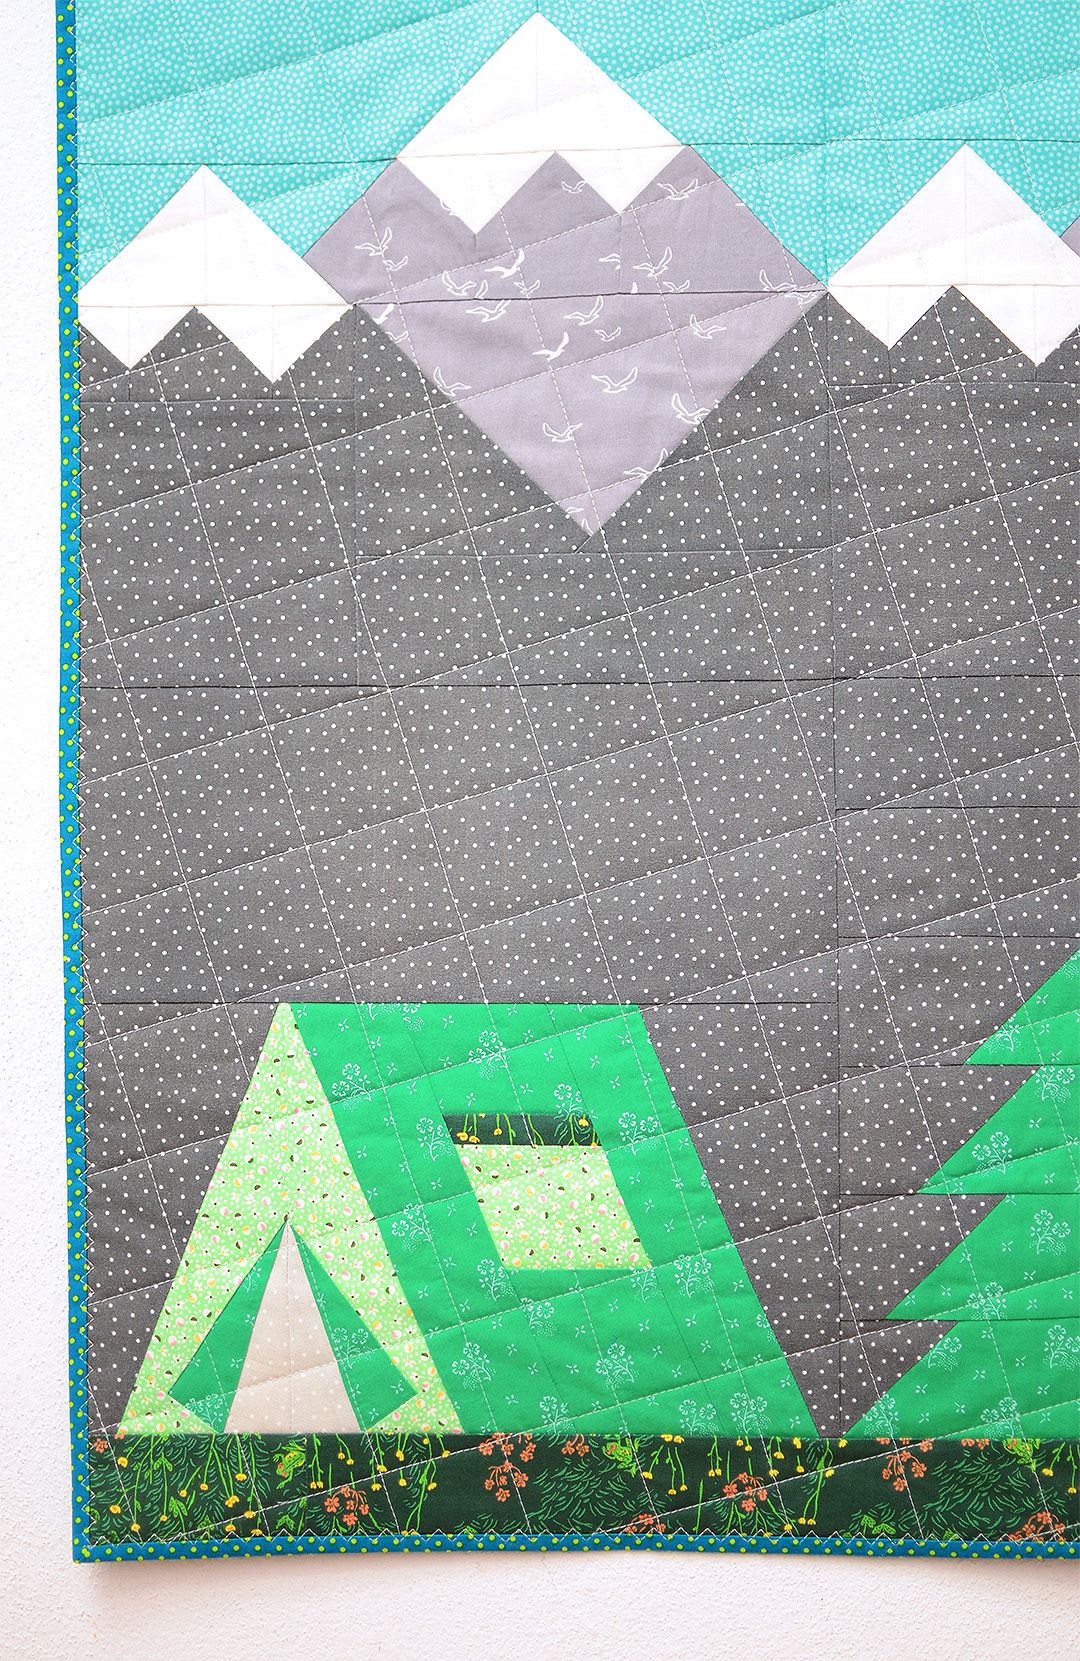 Camping In The Wild wall quilt pattern